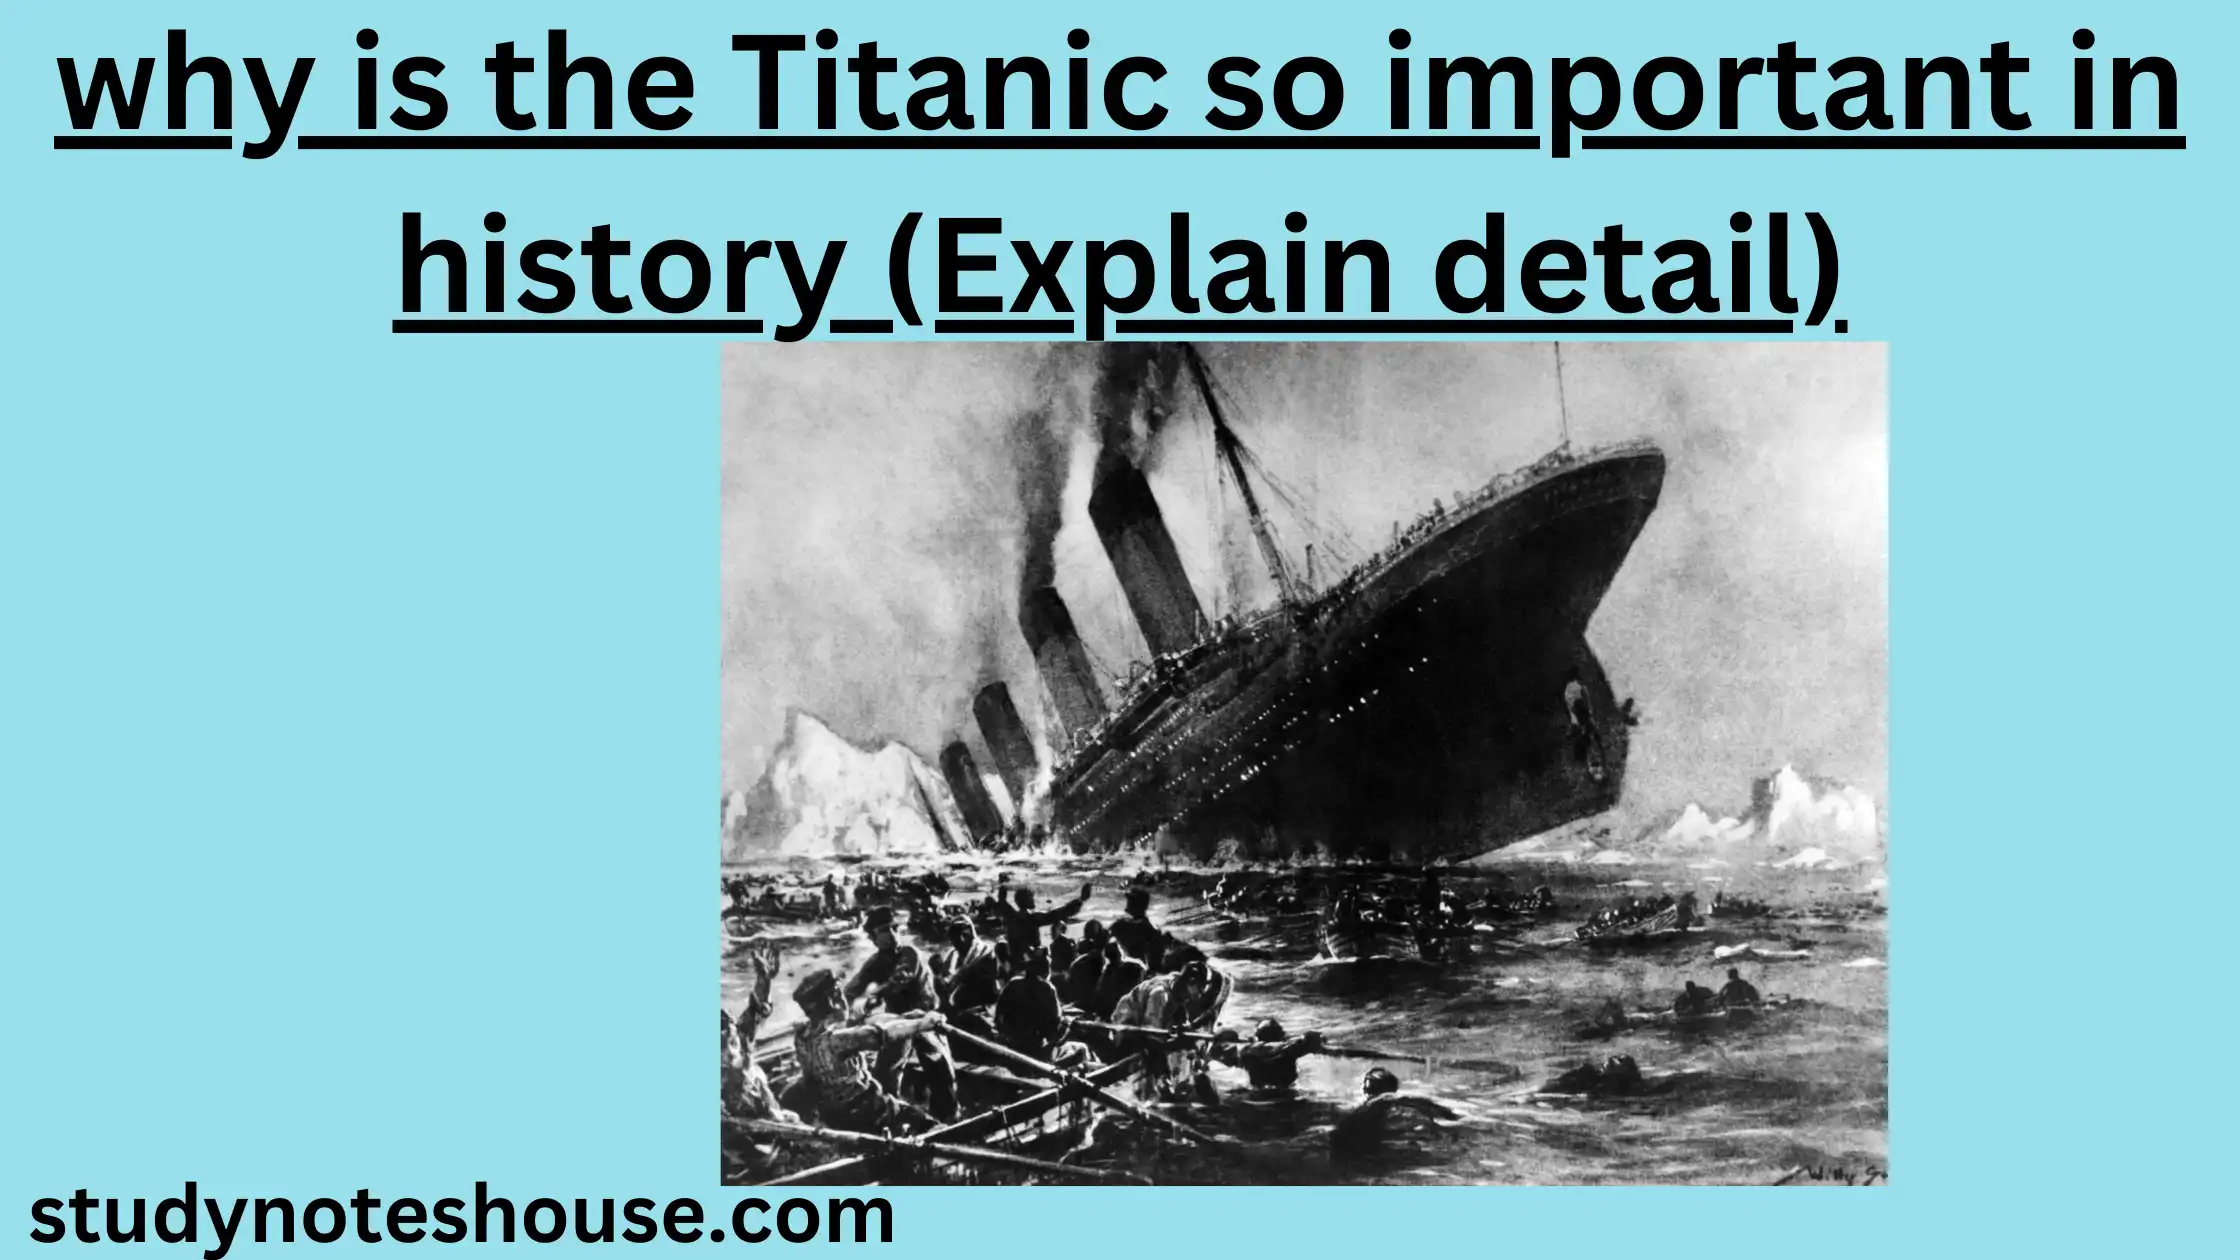 why is the Titanic so important in history